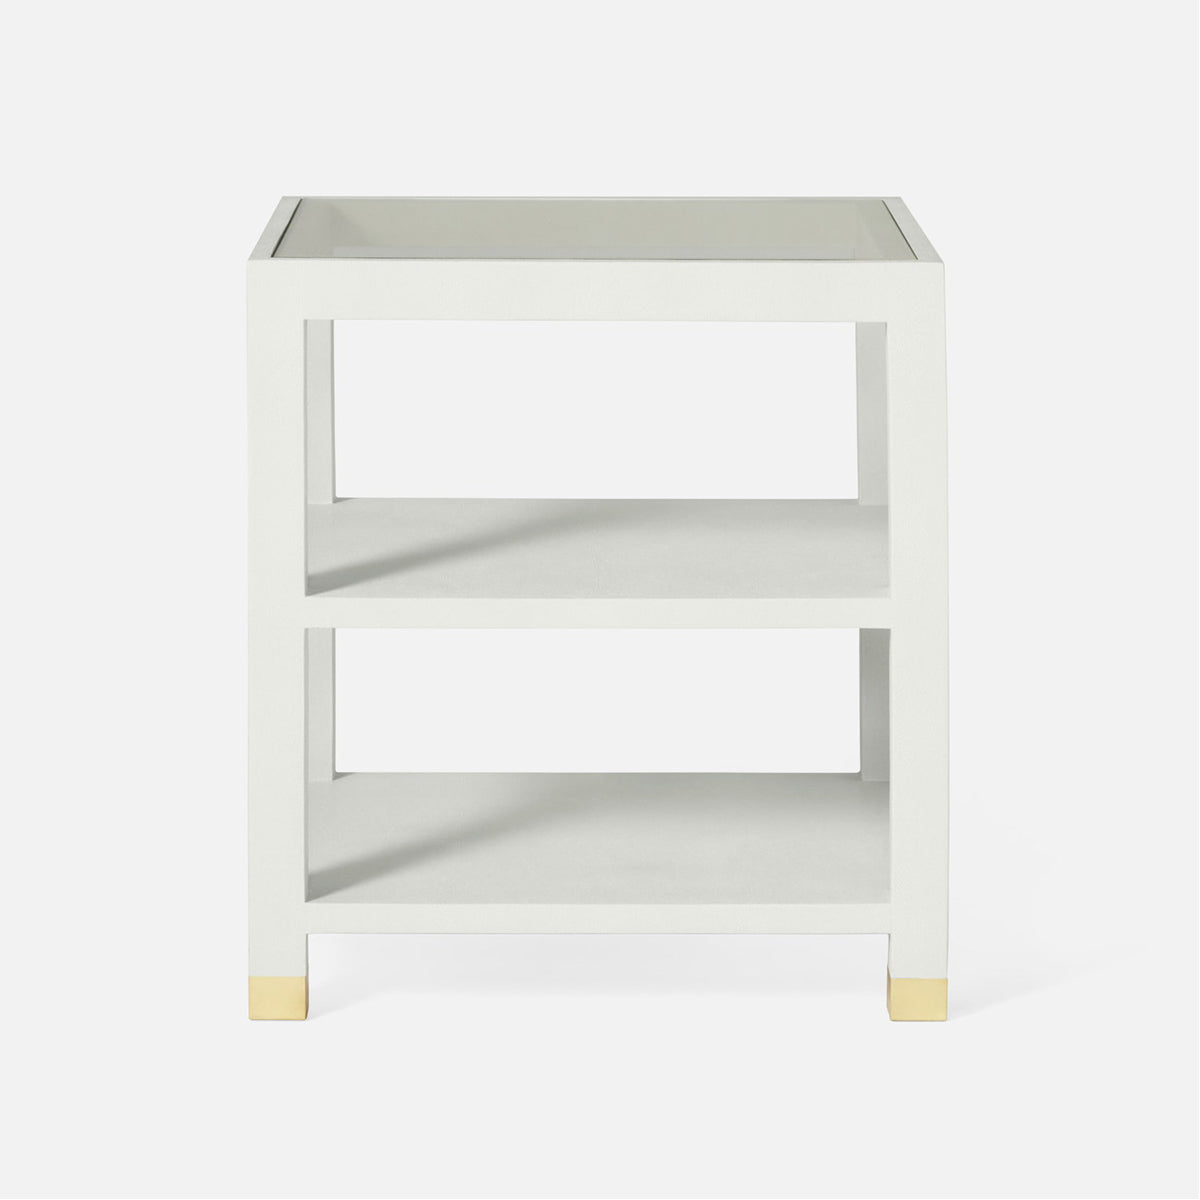 Made Goods Lafeu Square Side Table in Blanc Realistic Faux Shagreen